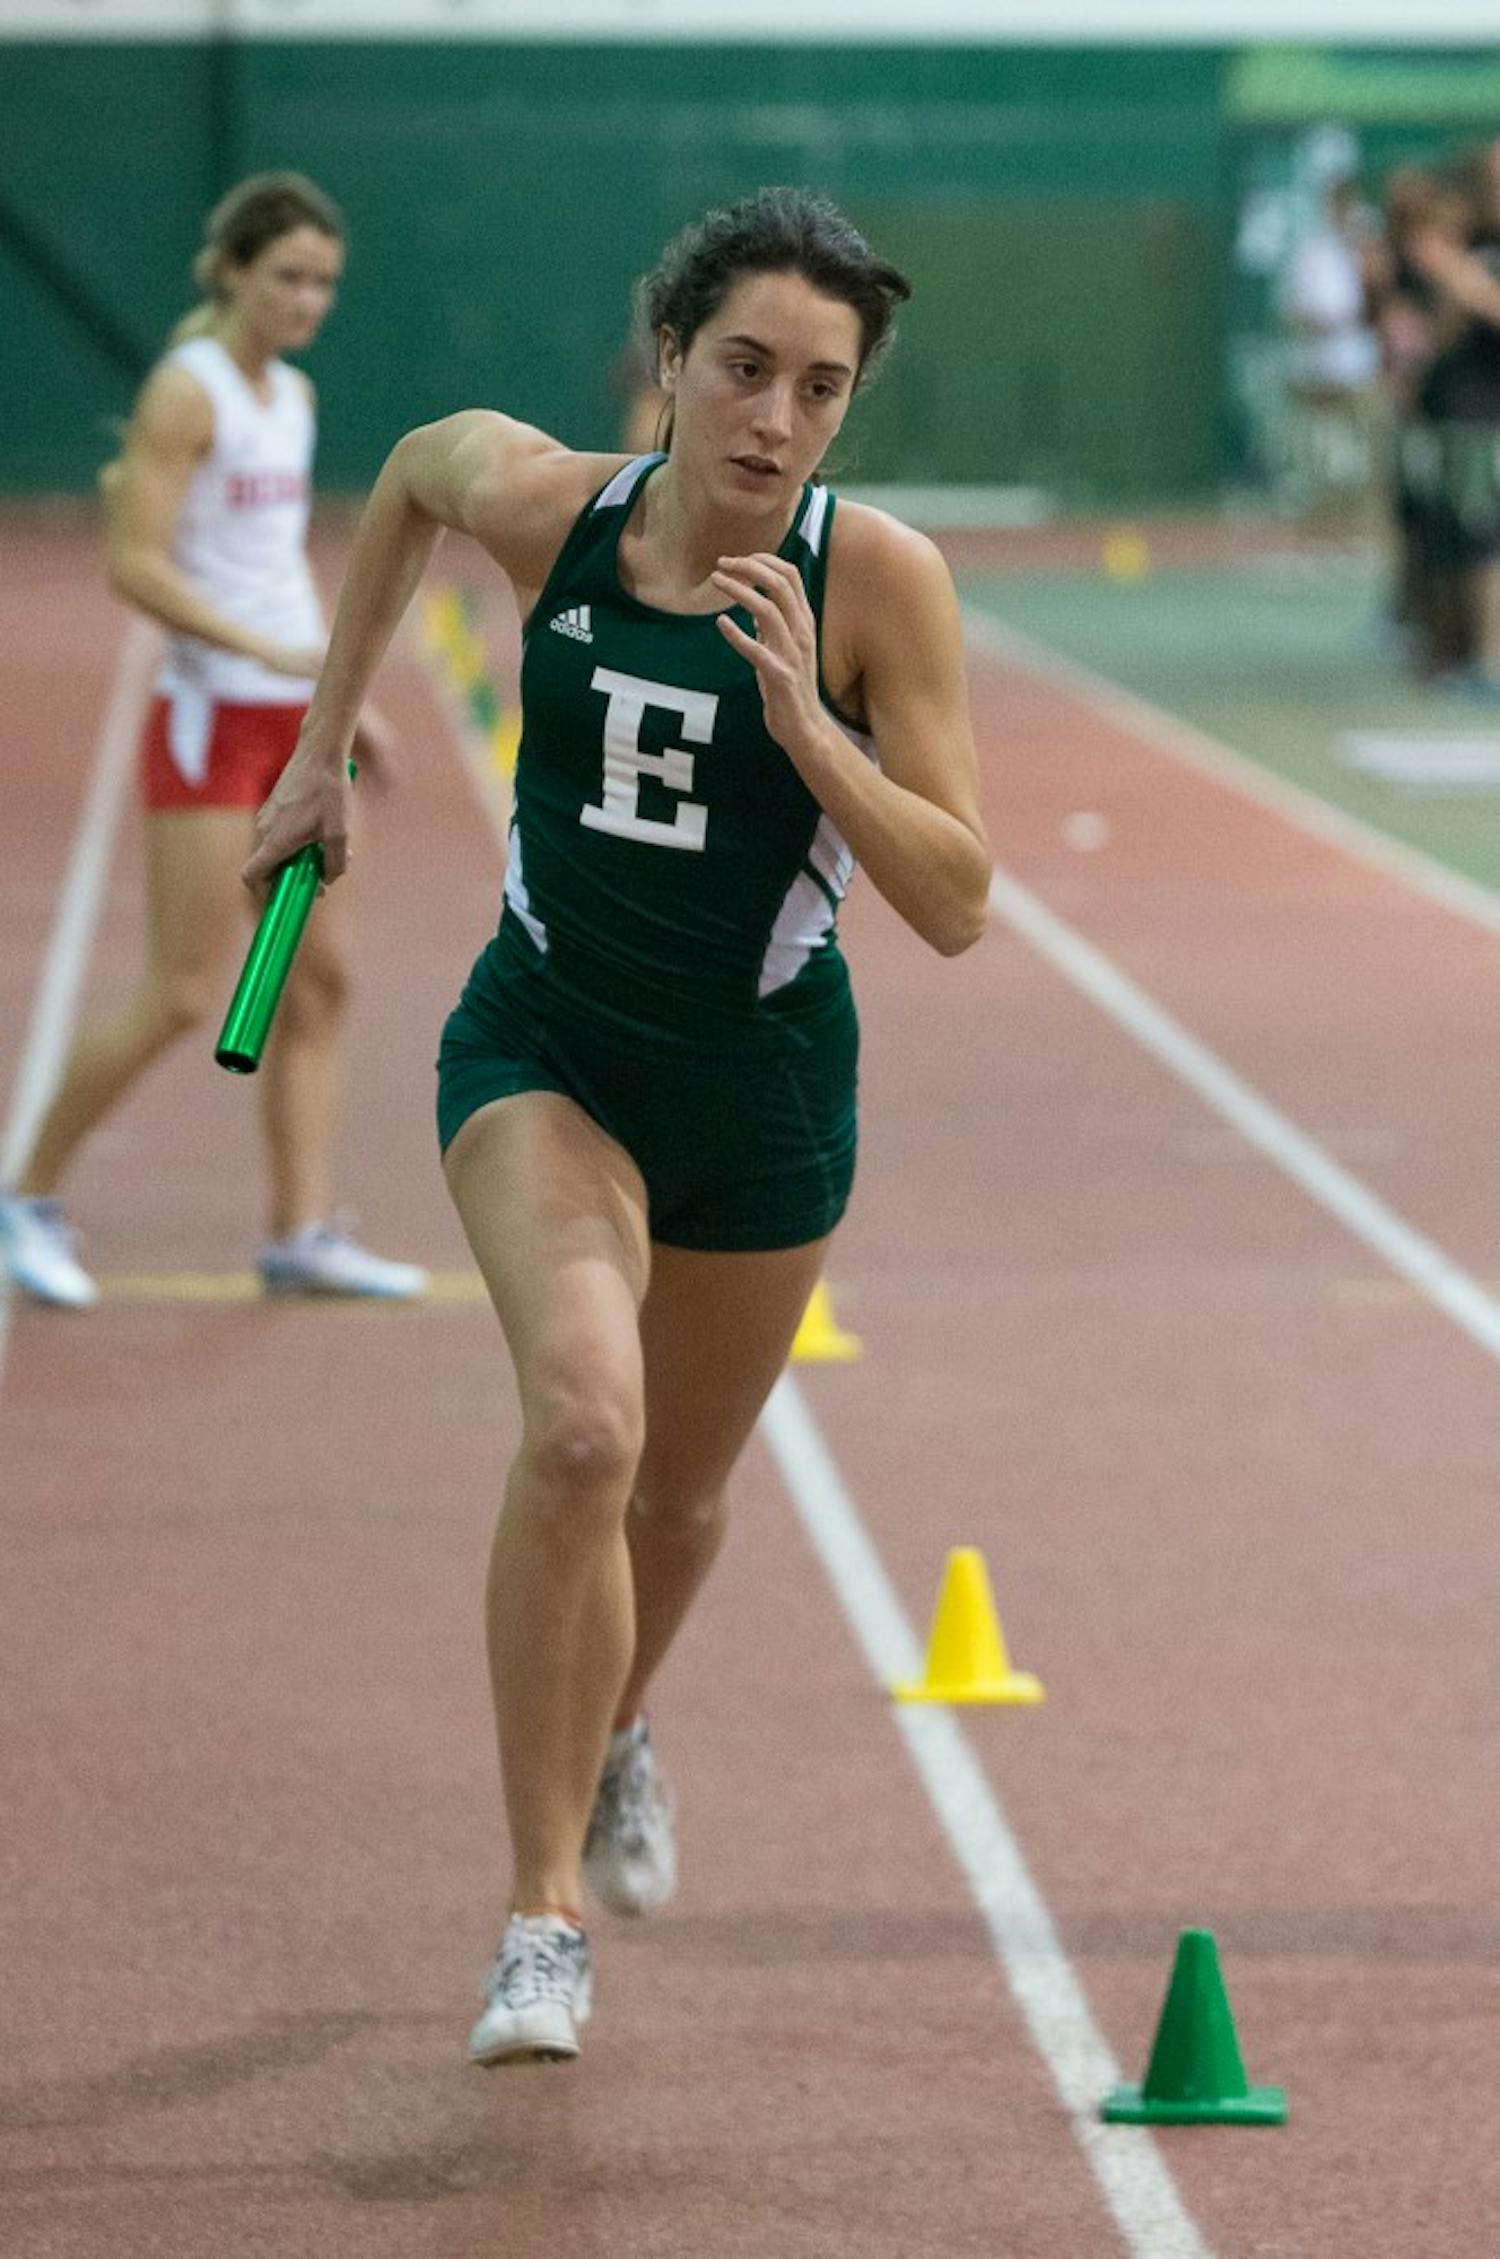 Eastern Michigan distance runner Marina Manjon-Rivadulla takes over for her leg of the 1600m during the EMU Triangular on 10 January at Bowen Field House.